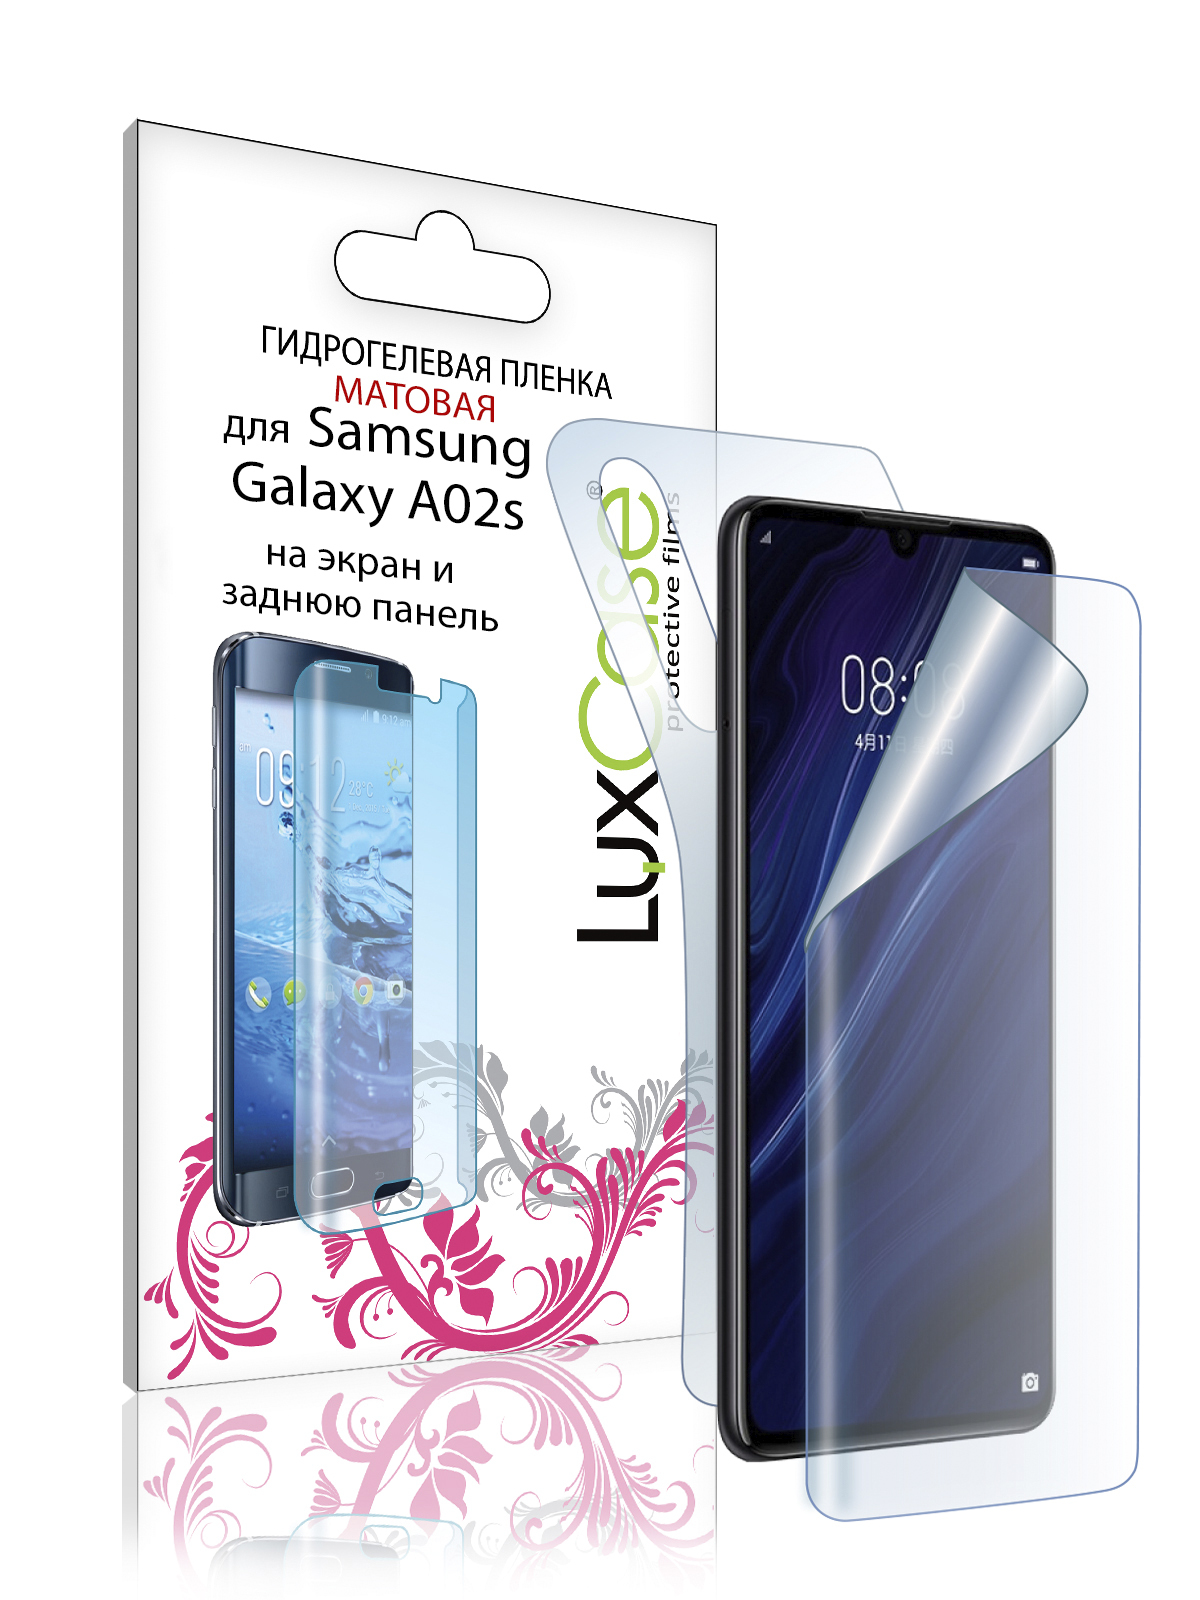 Пленка гидрогелевая LuxCase для Samsung Galaxy A02s 0.14mm Front and Back Matte 86370 гидрогелевая пленка luxcase для samsung galaxy a02s 0 14mm front and back transparent 86185